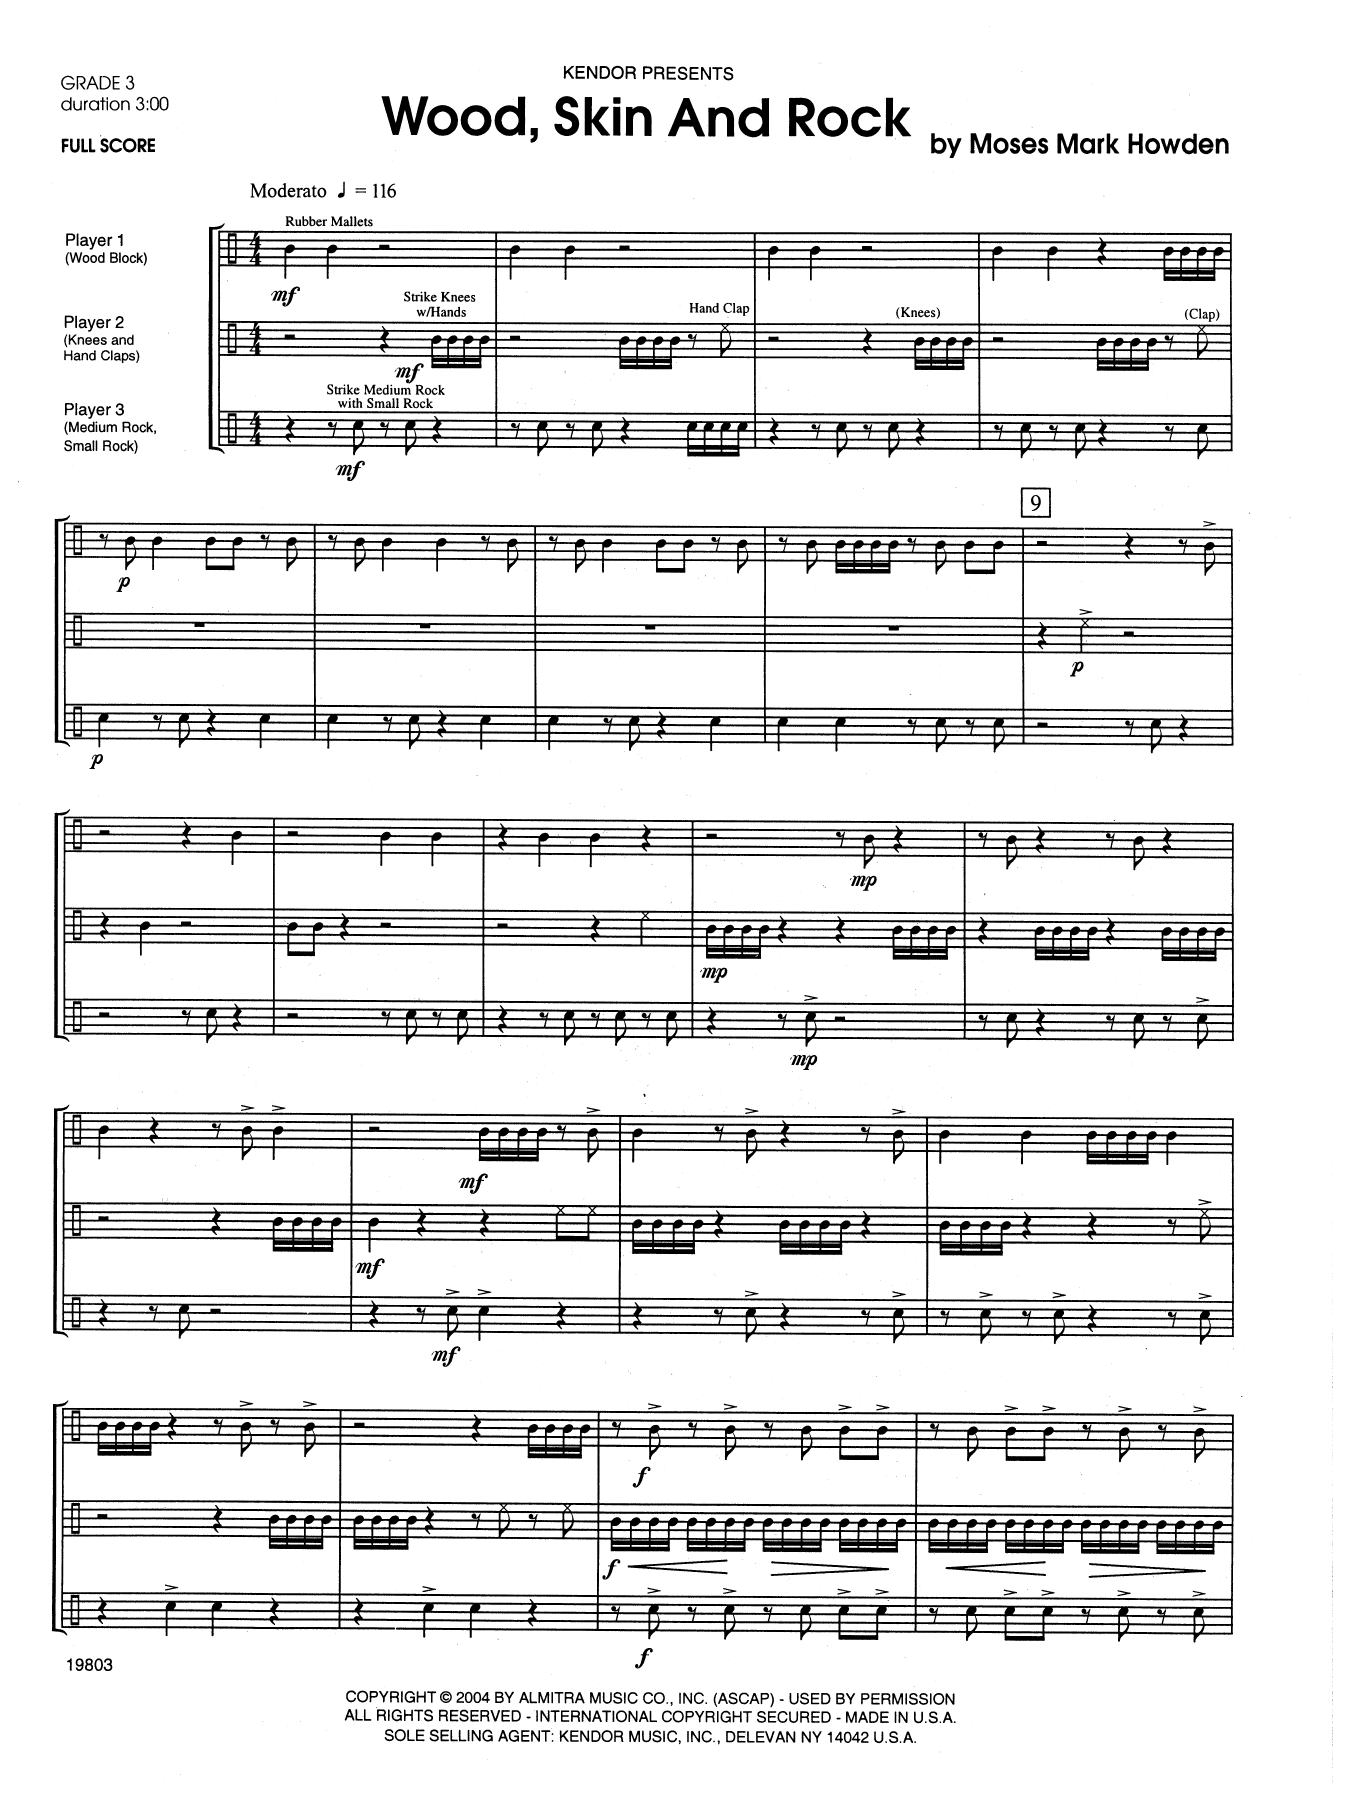 Download Howden Wood, Skin And Rock - Full Score Sheet Music